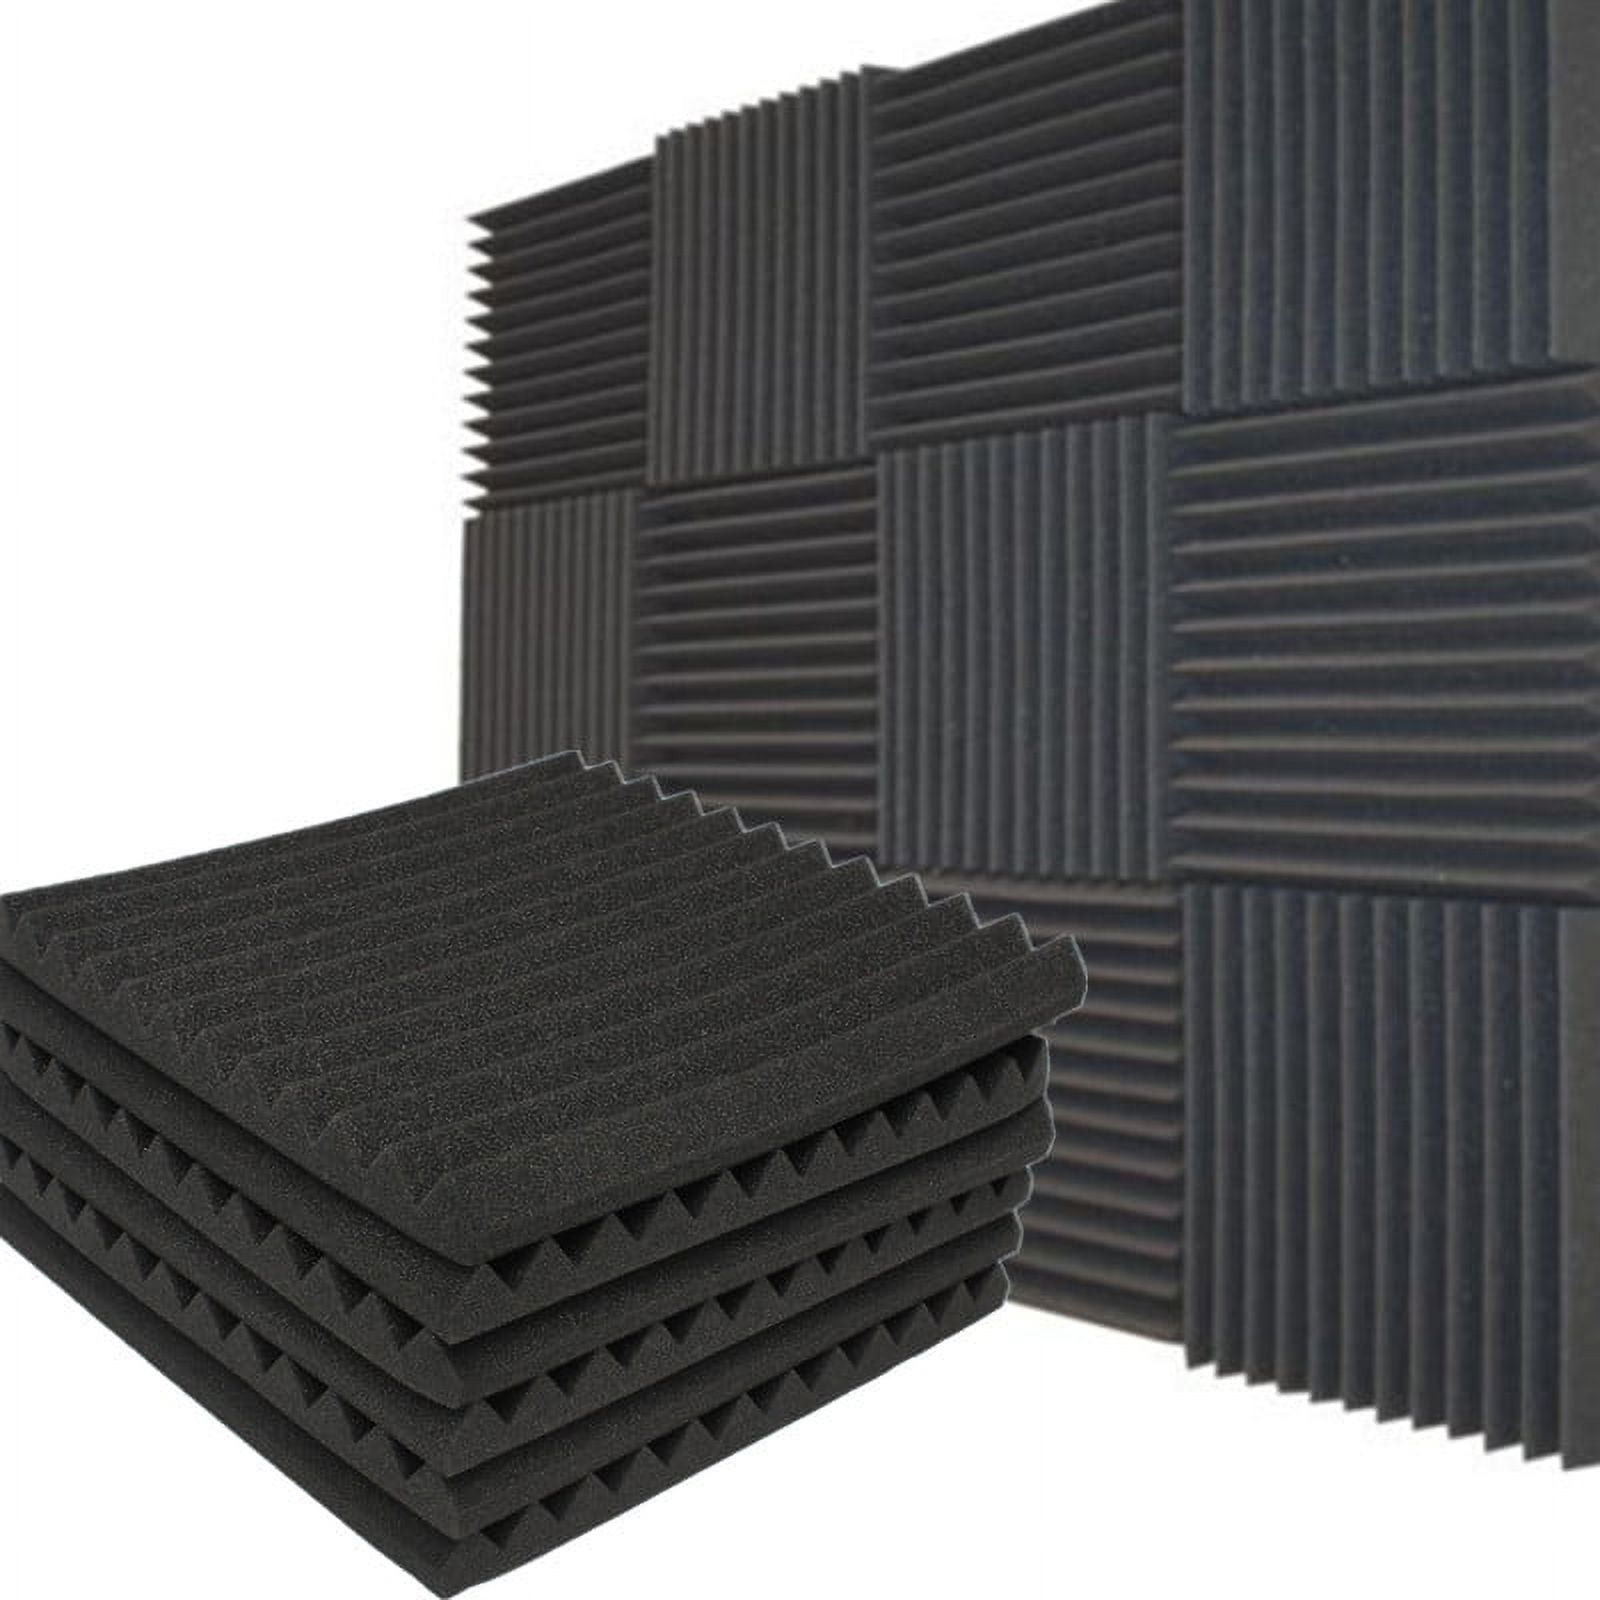 White Acoustic Foam Panels - Wedge Style Studio Foam Soundproofing Tiles -  12x12 Inch - Multiple Thicknesses (2 Inch Thick - 4 Pack)